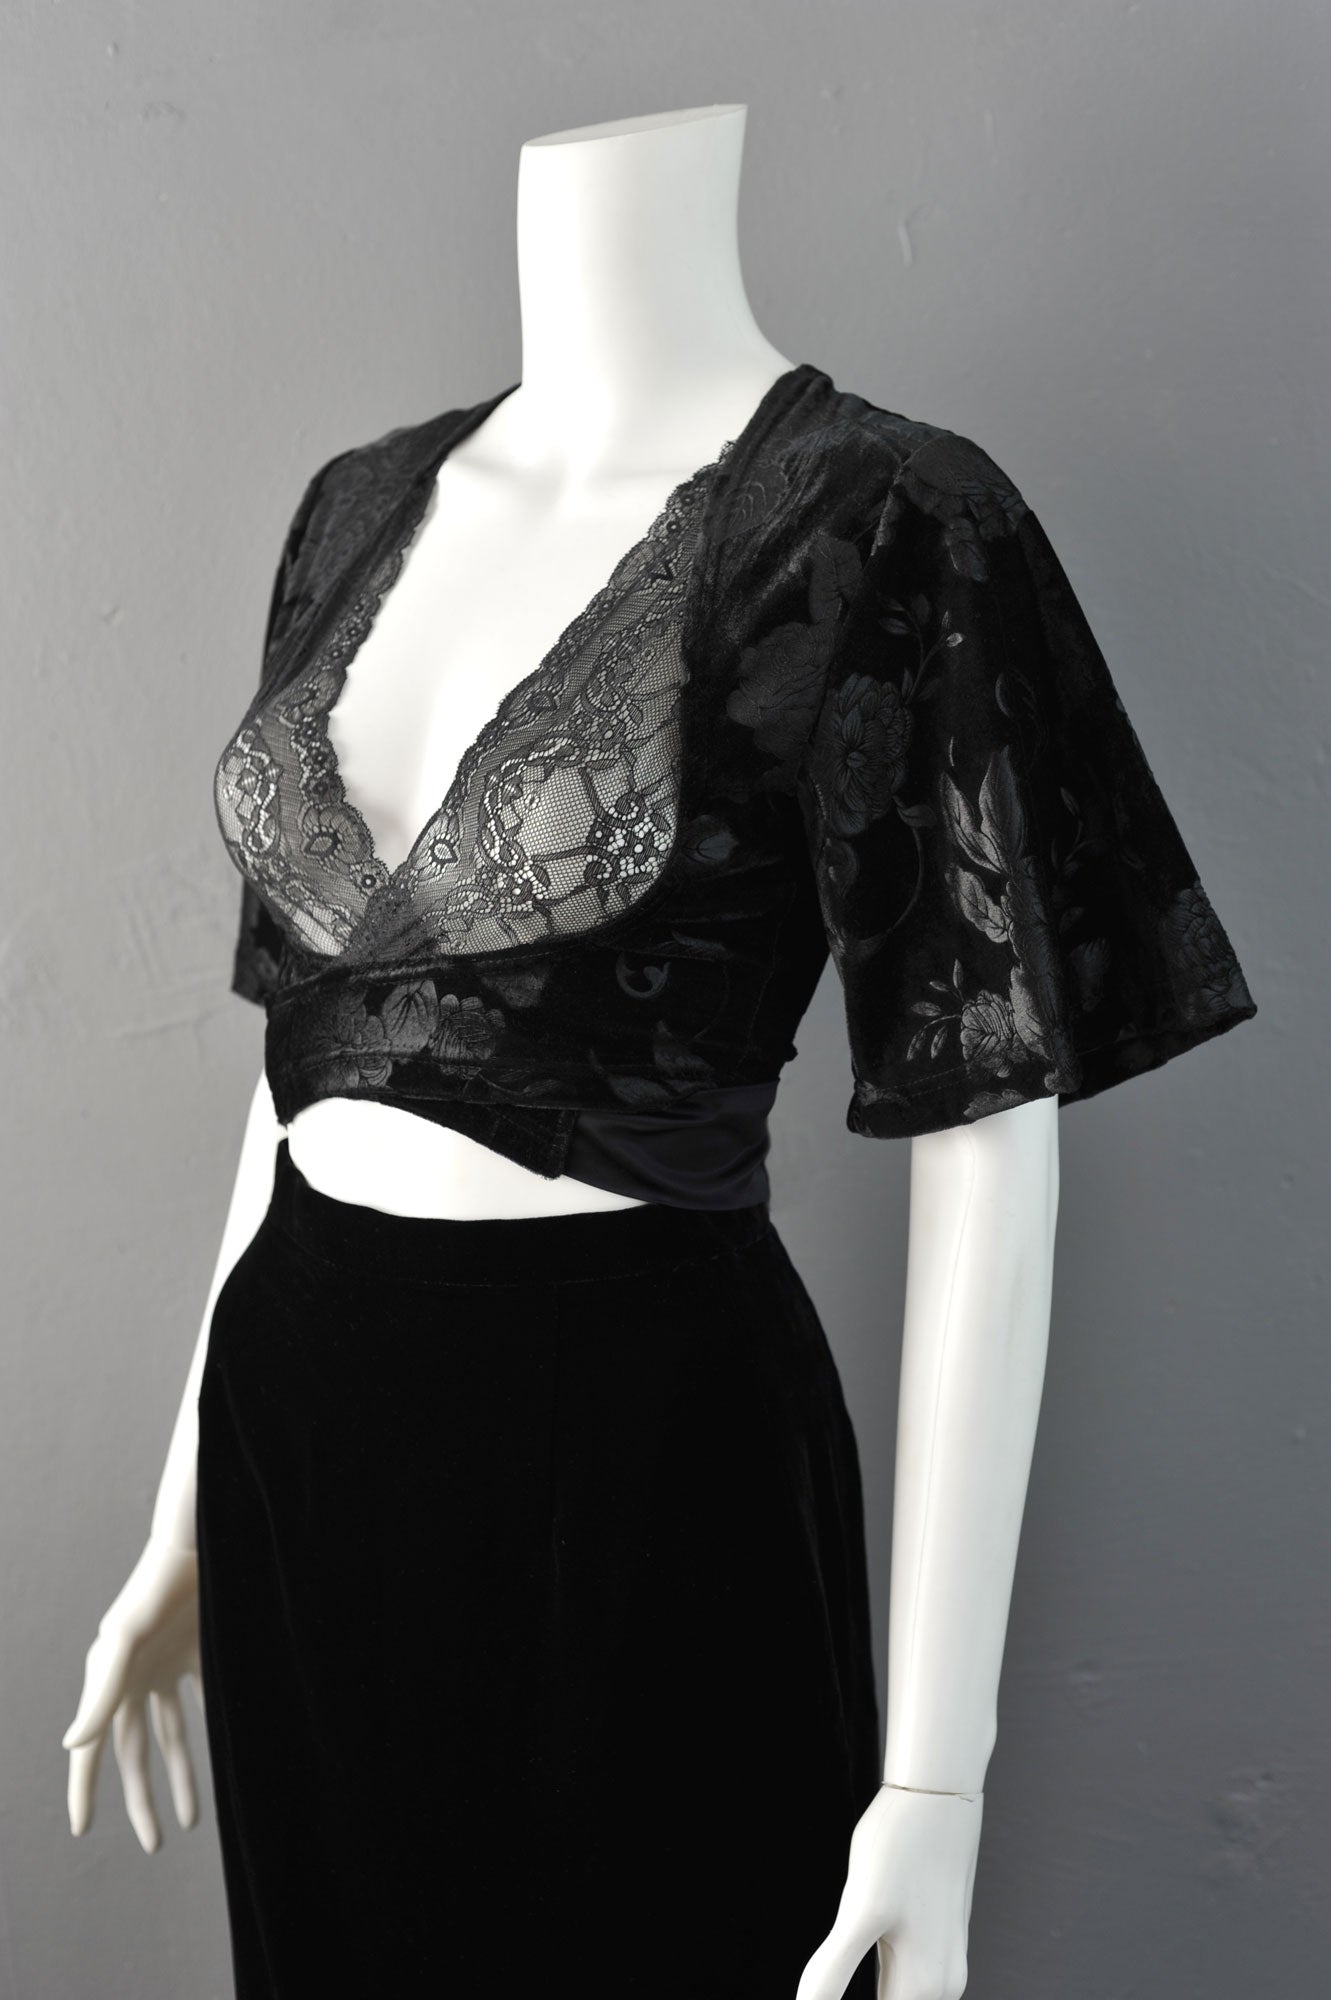  Bolero with Lace Bust